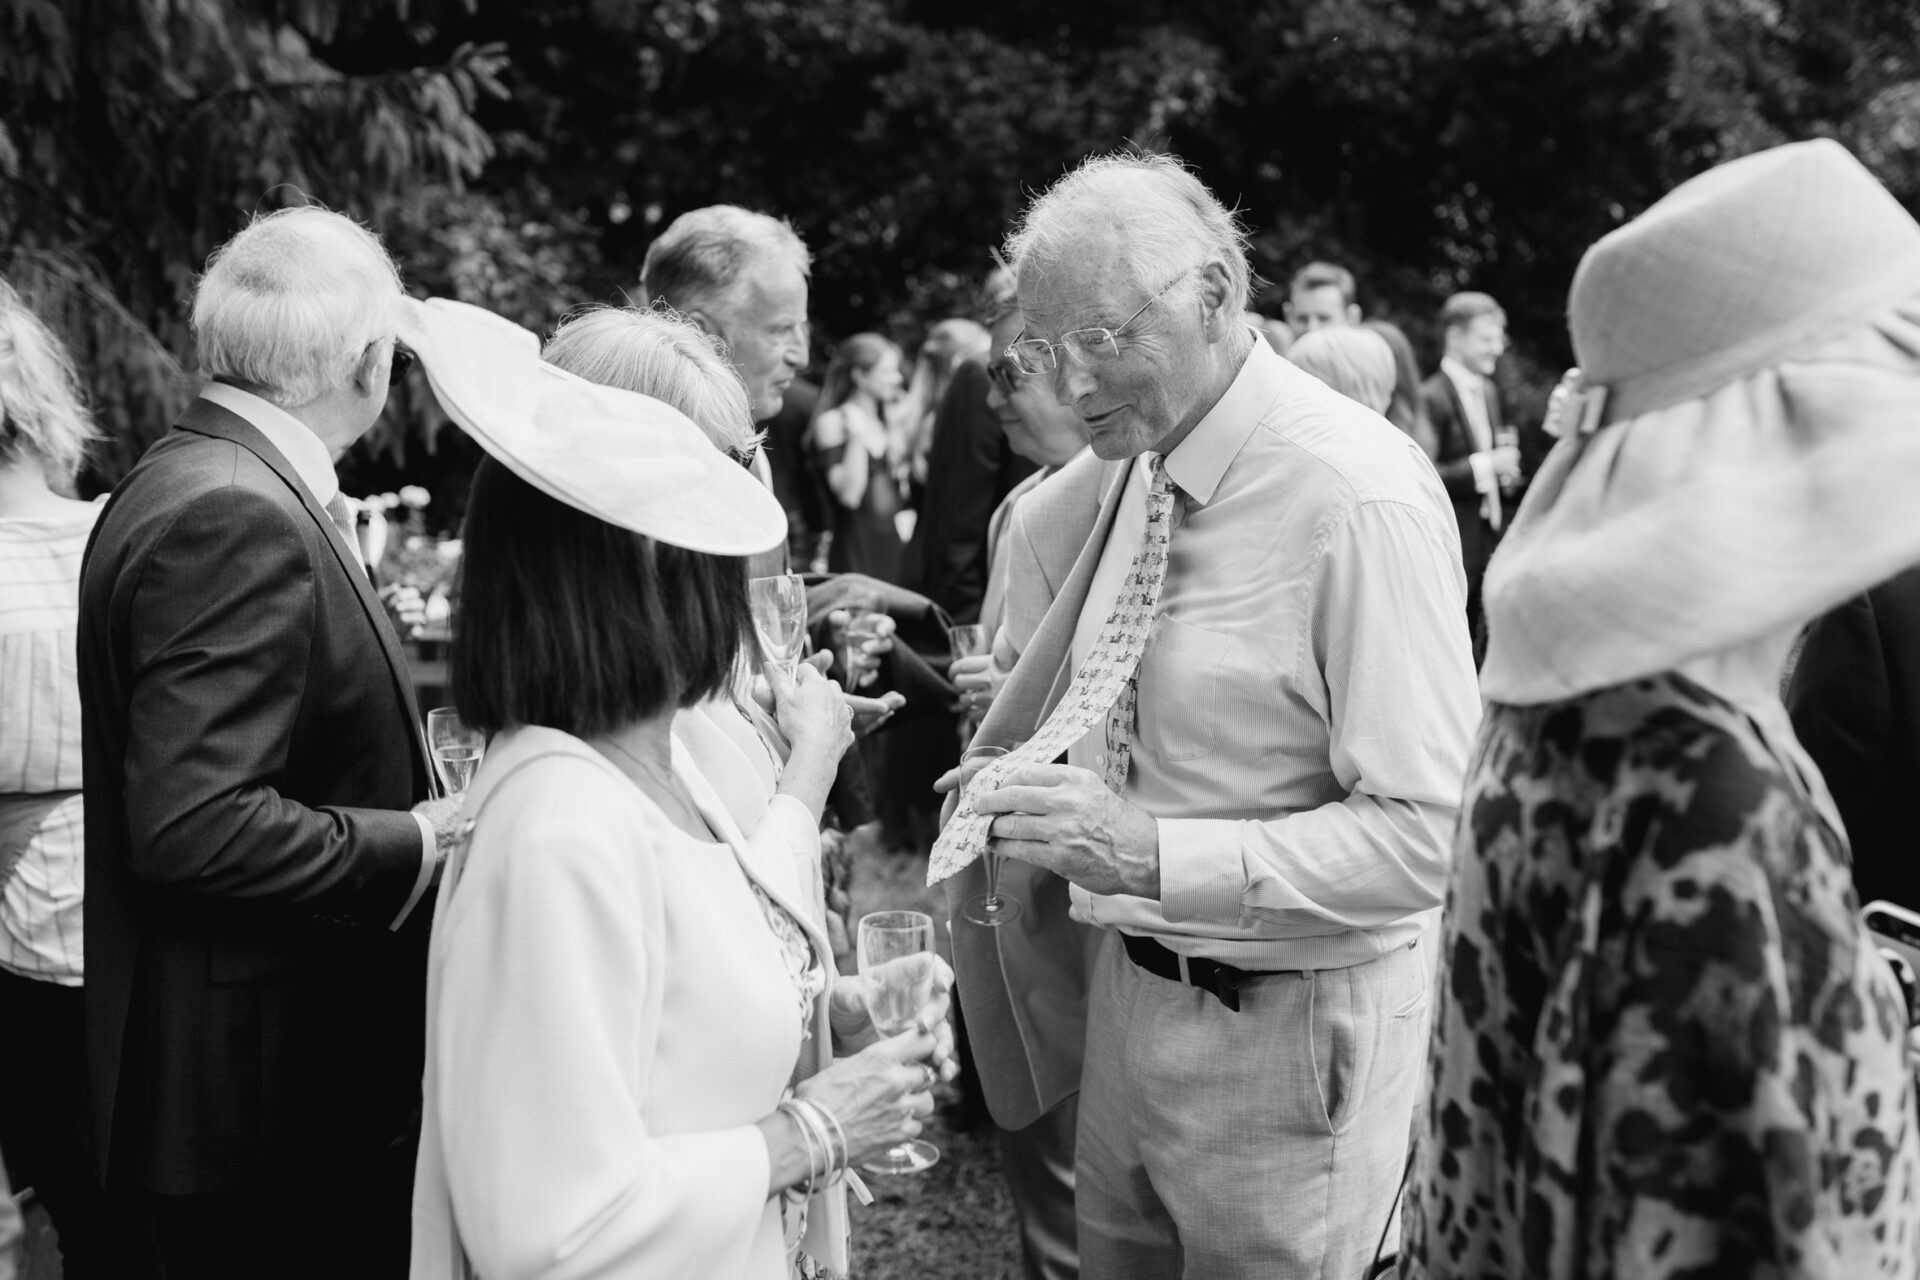 Wedding guests mingle at the outdoor drinks reception